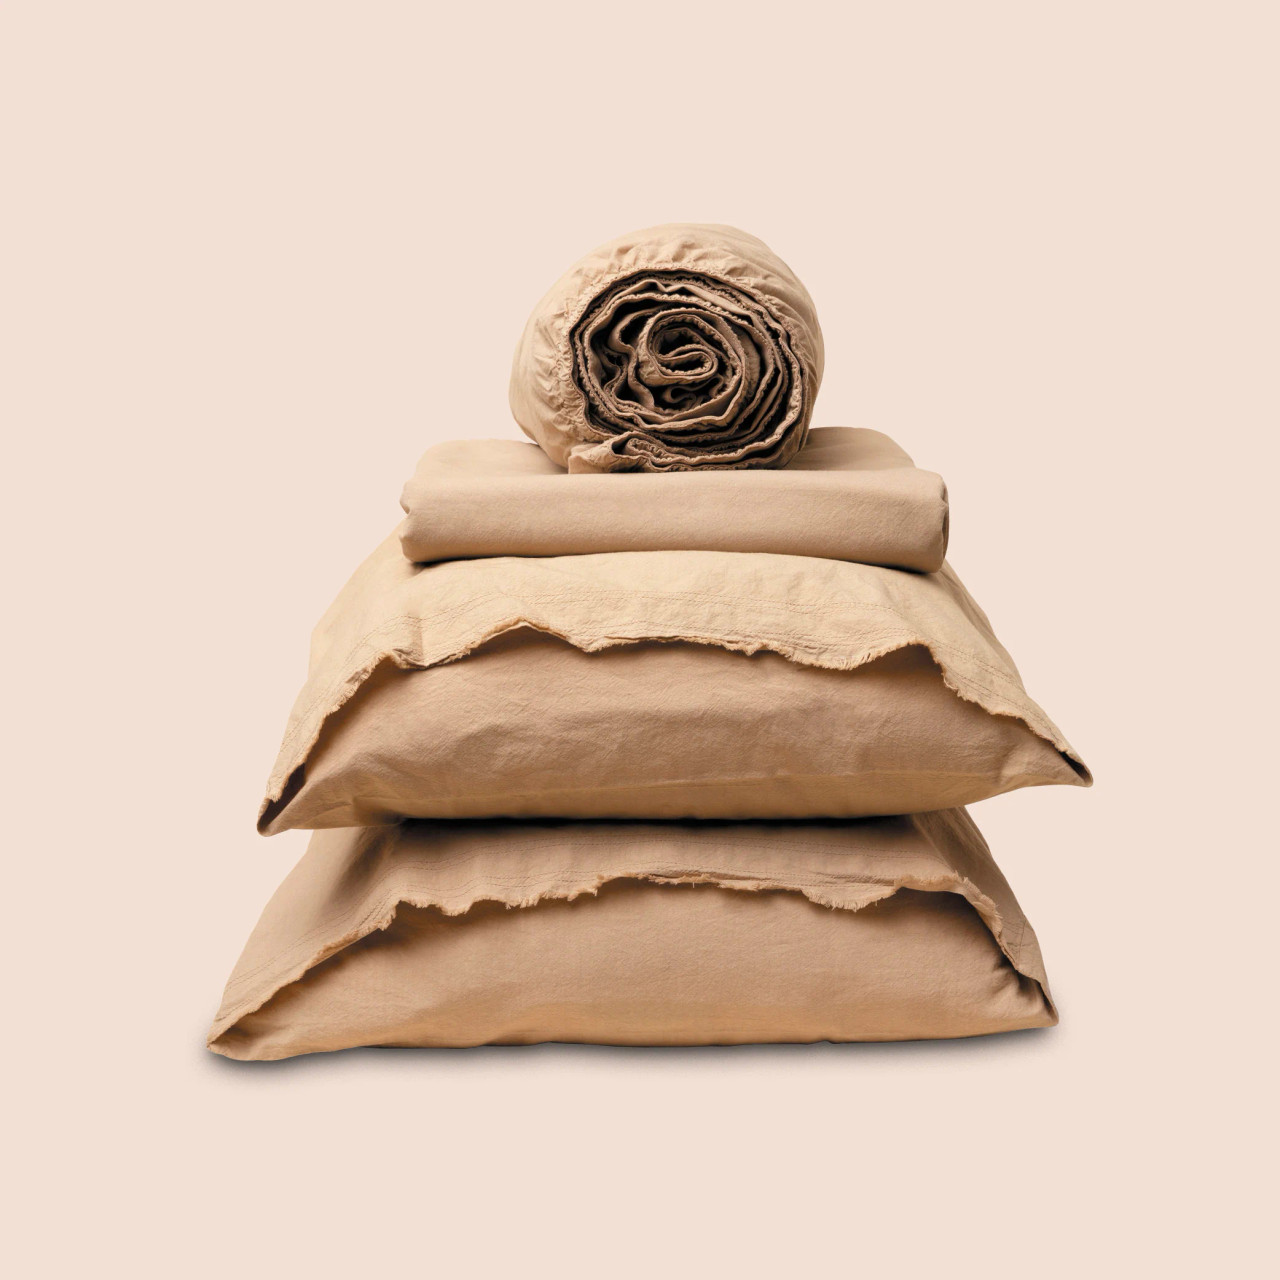 Dr. Weil Garment Washed Percale Bed Sheet Set by PureCare - Ochre Color Stacked